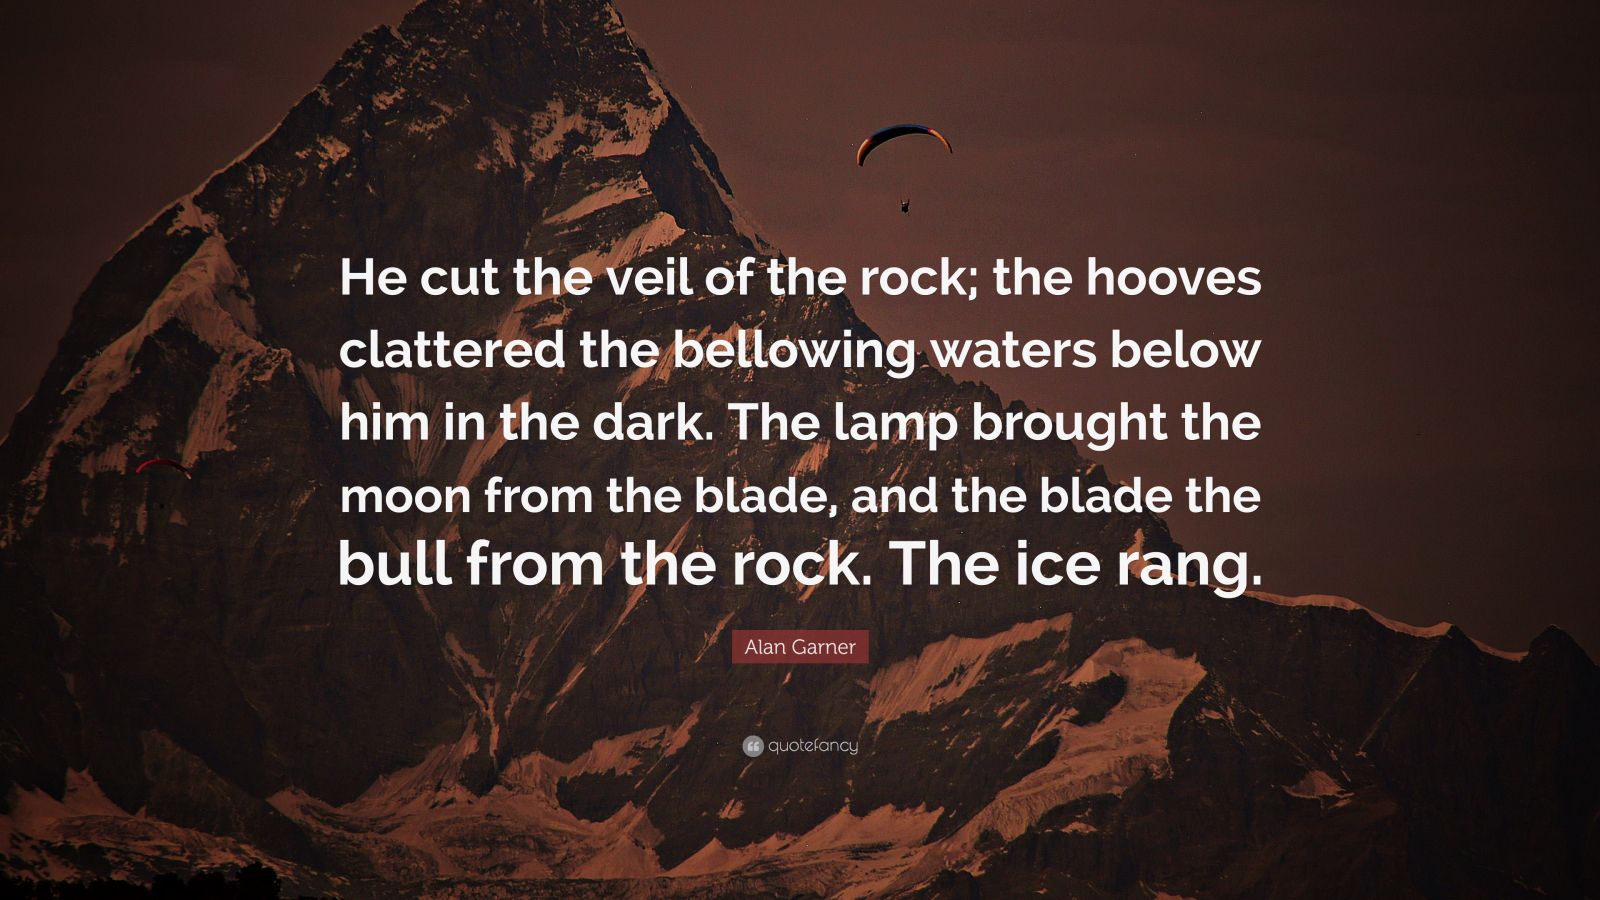 Garner Quote: “He cut the veil of the rock; the hooves clattered the bellowing waters him in the The lamp brought the moon